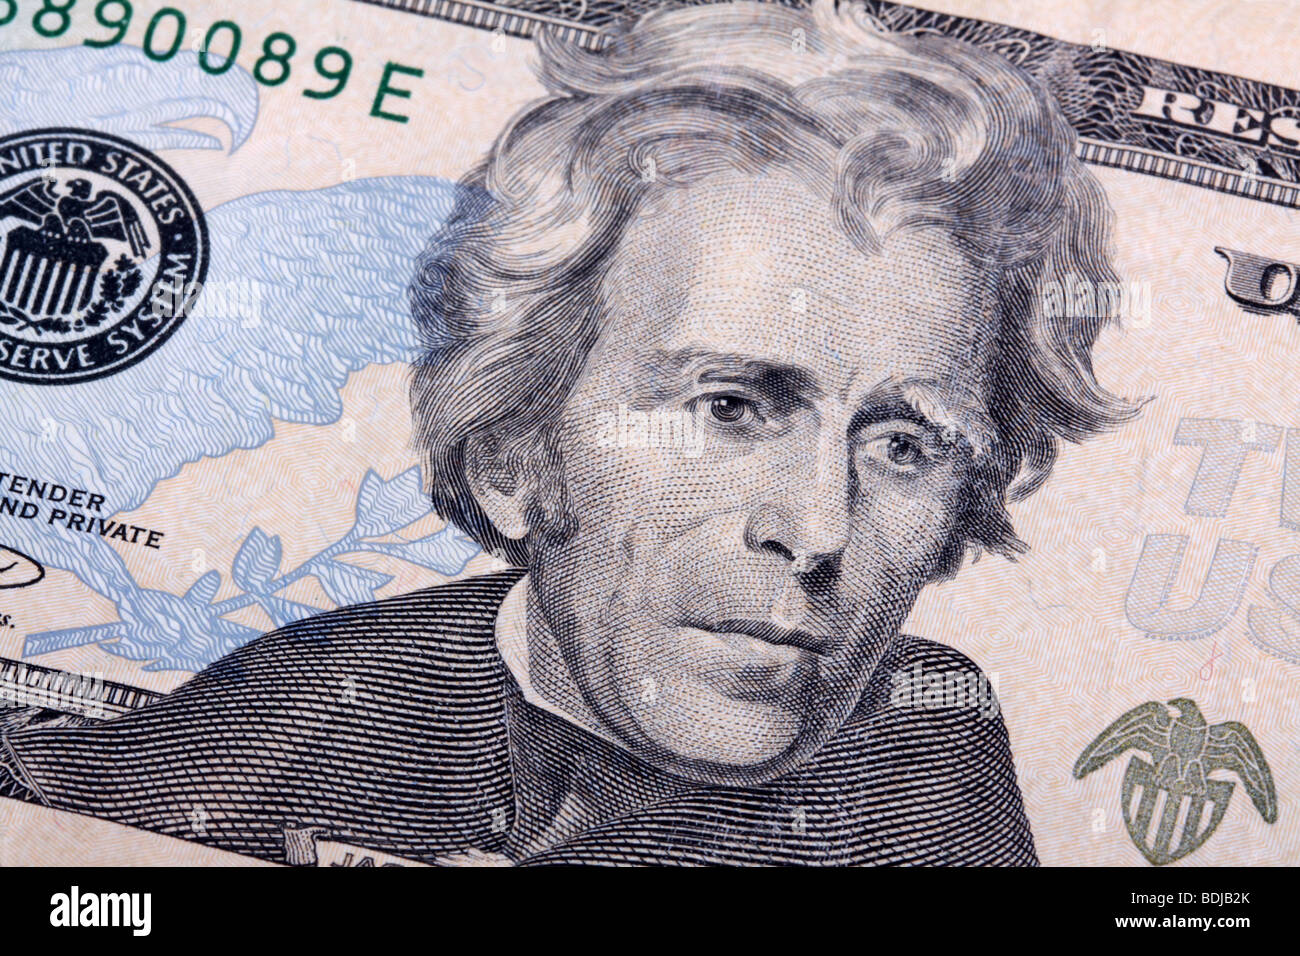 Detailed view of United States currency Stock Photo